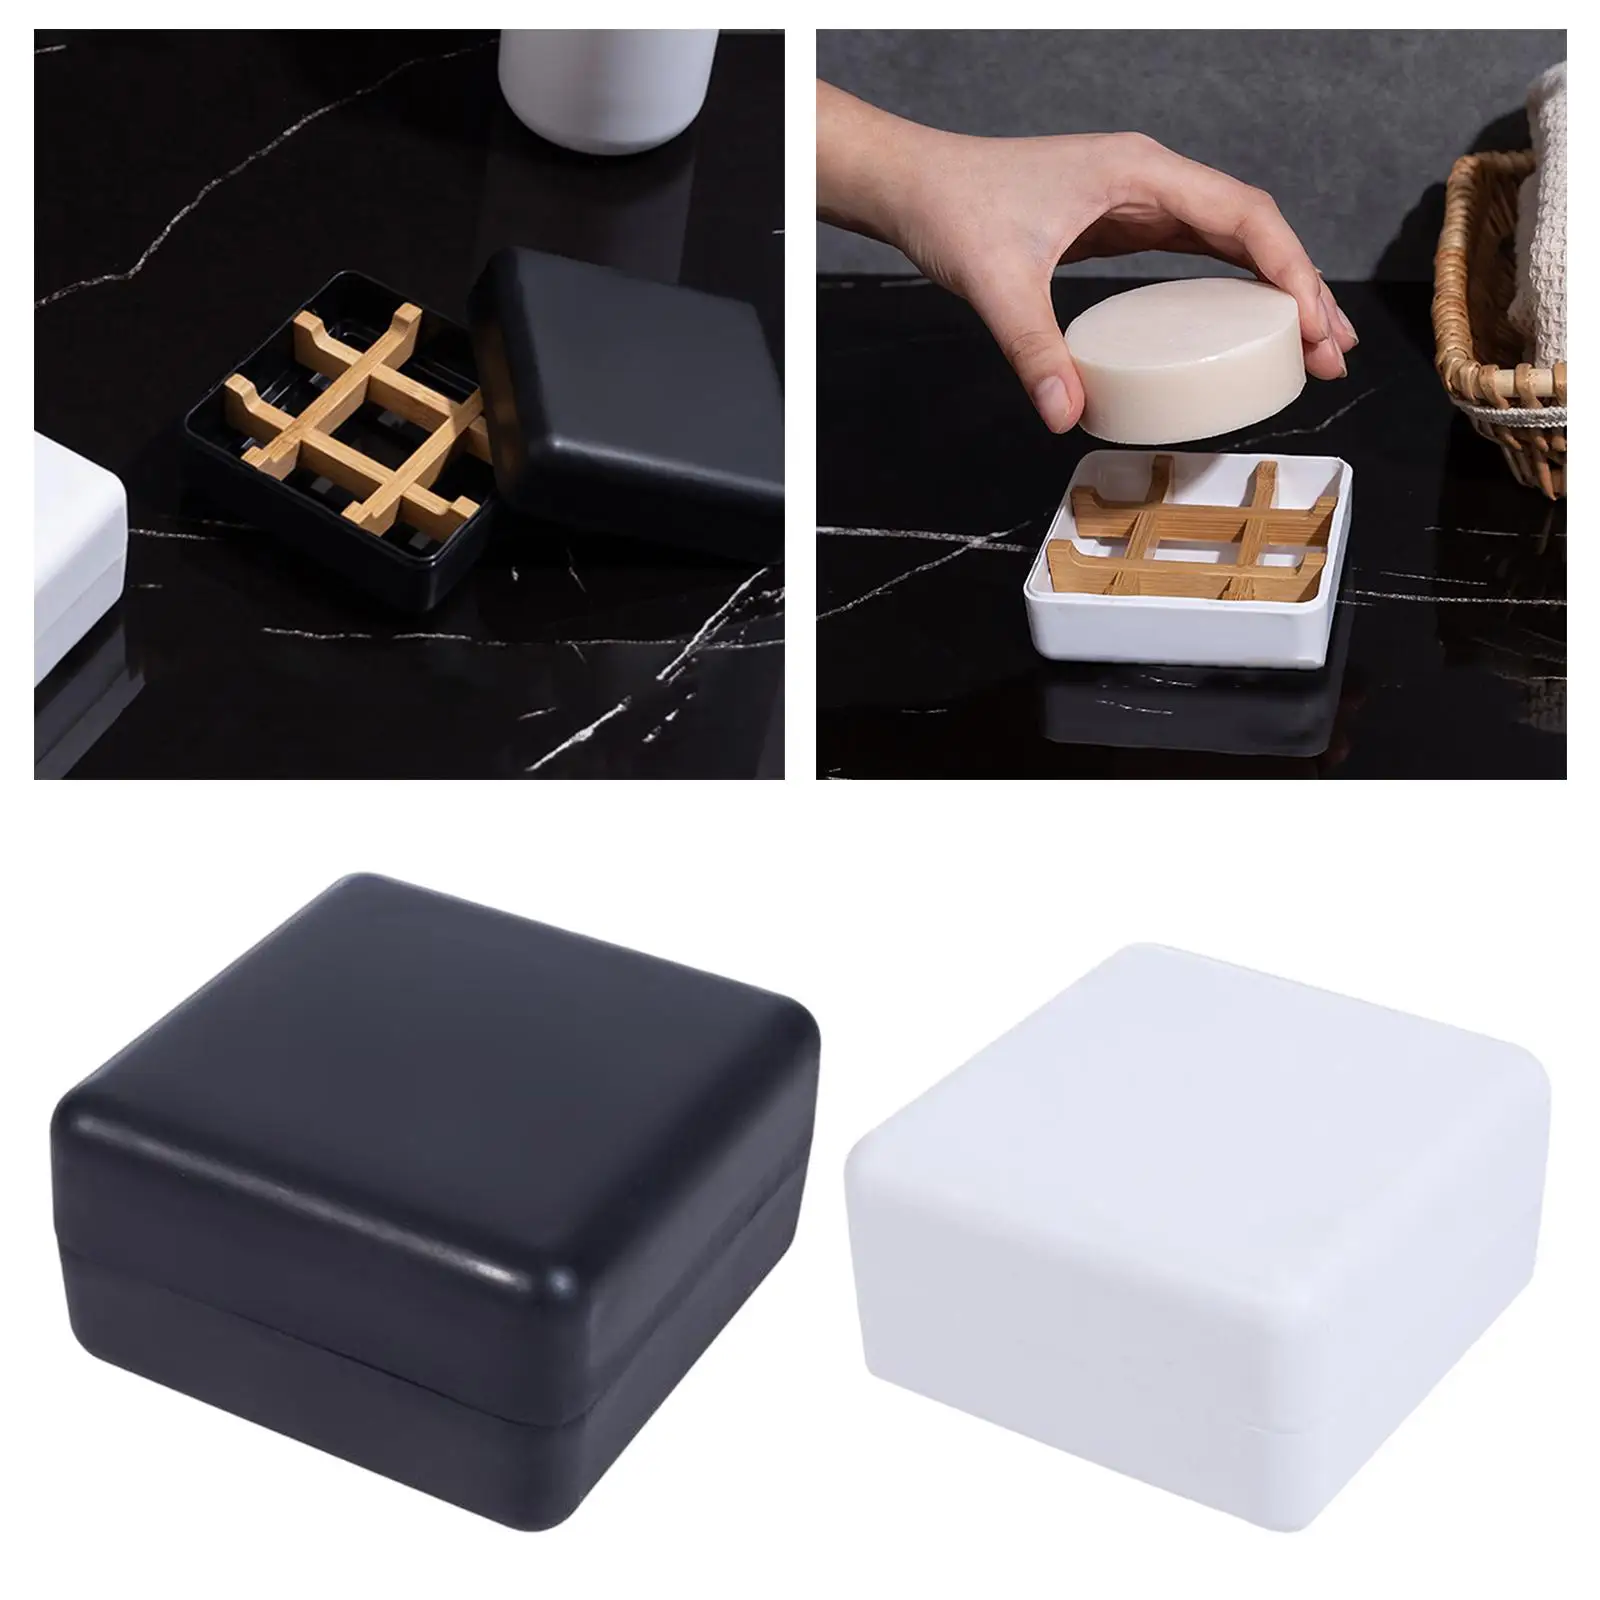 Travel Soap Dish, Plate Tray with Cover Soap Bar Draining Design Drain Soap Holders Soap Box for Travel Sink Home Bathtubs Gym